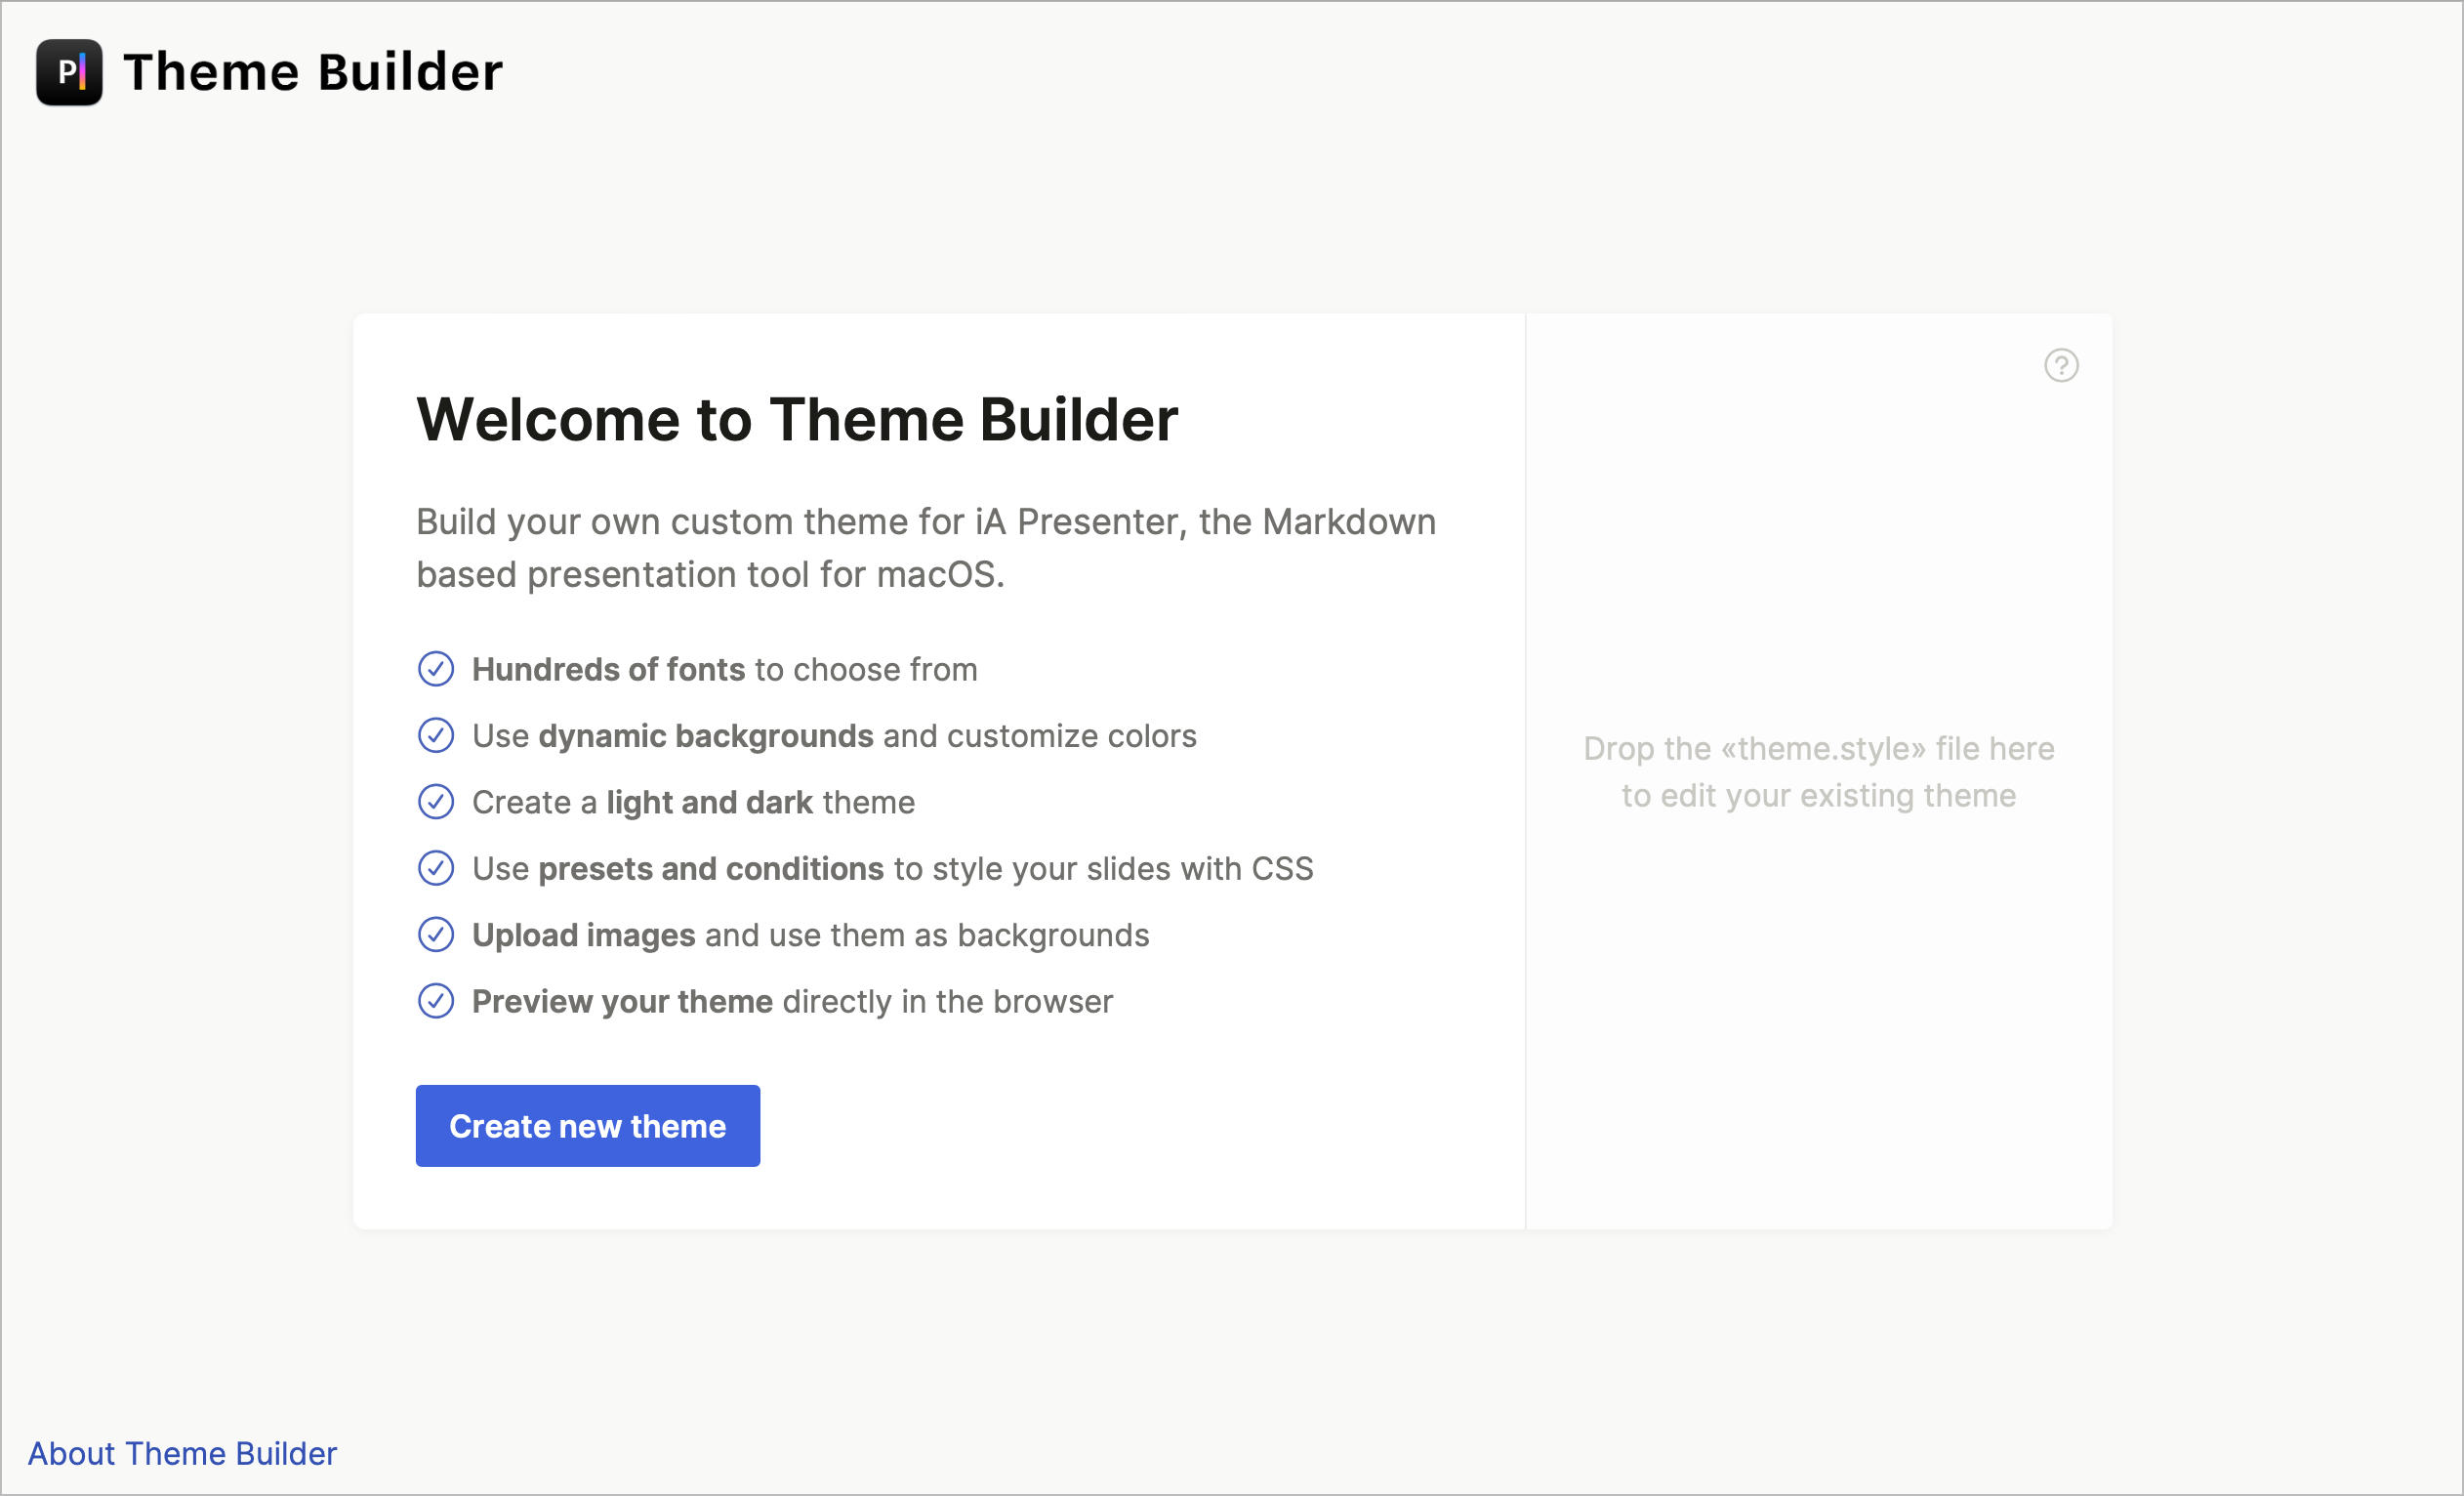 The iA Presenter theme builder, available on the web